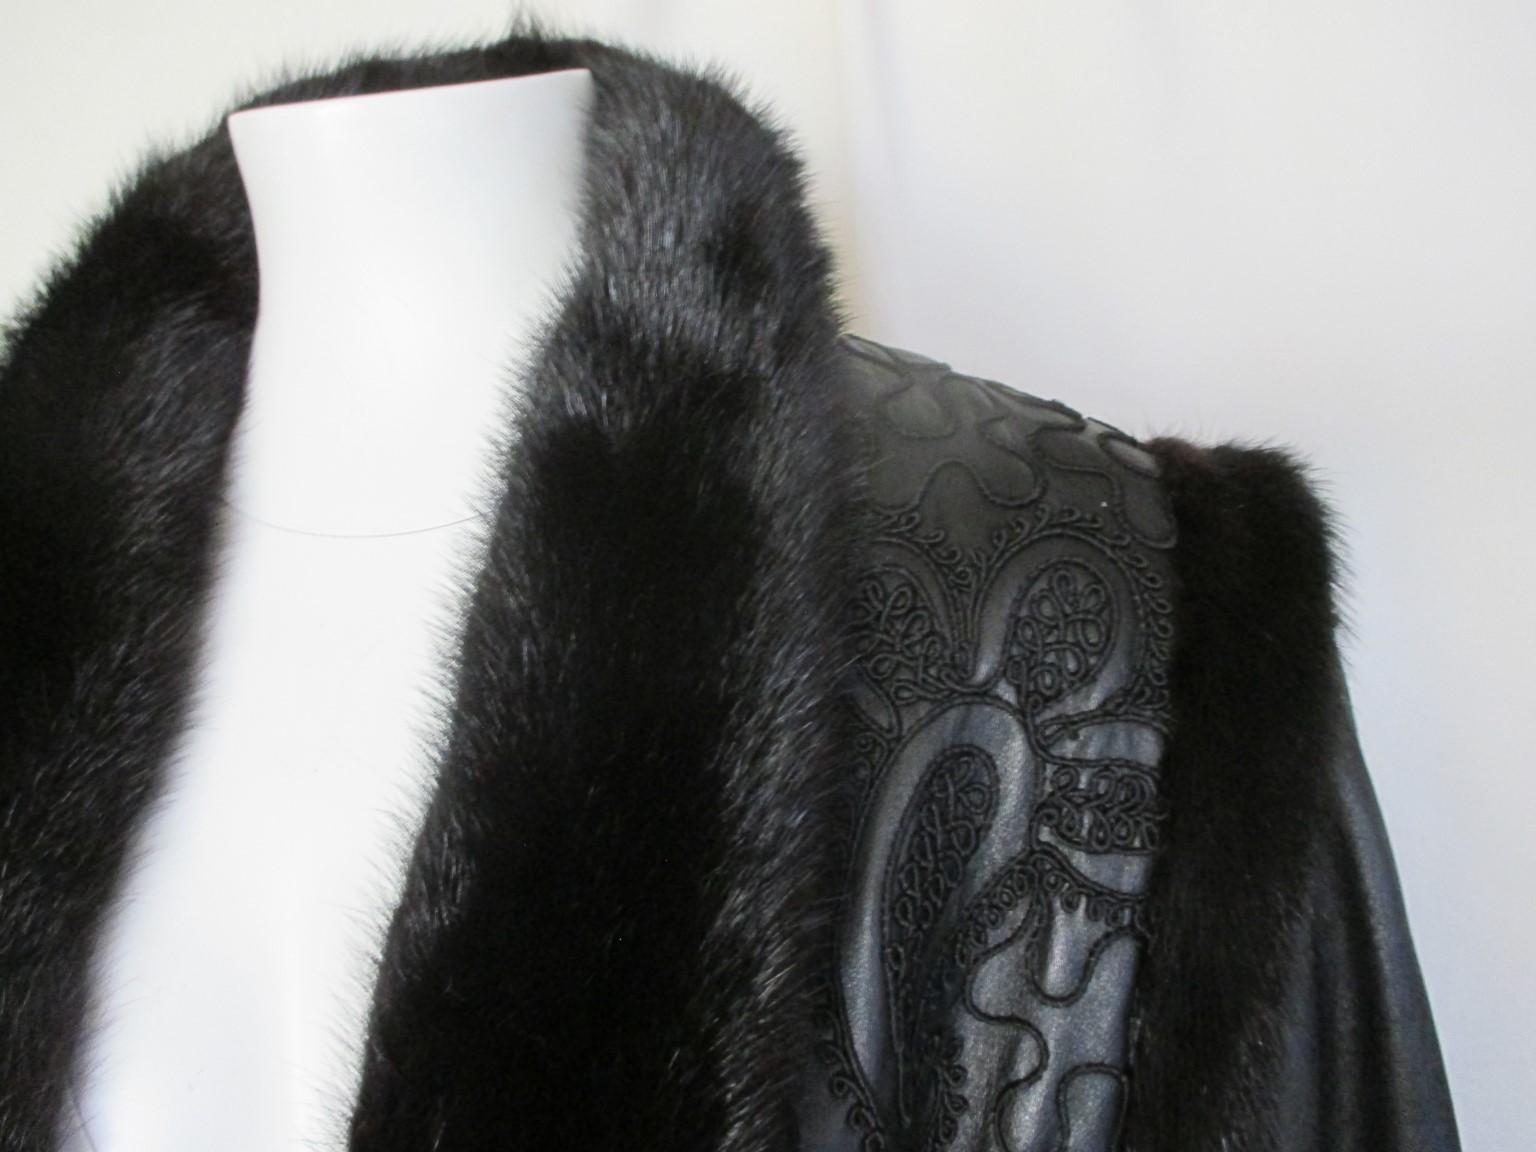 This rare vintage jacket is made from leather designed with persian Lamb fur
and trimmed with mink fur.

We offer more luxury fur items, view our frontstore.

Details:
Color: black
Fully lined
In pre-owned condition with some minor wear at the